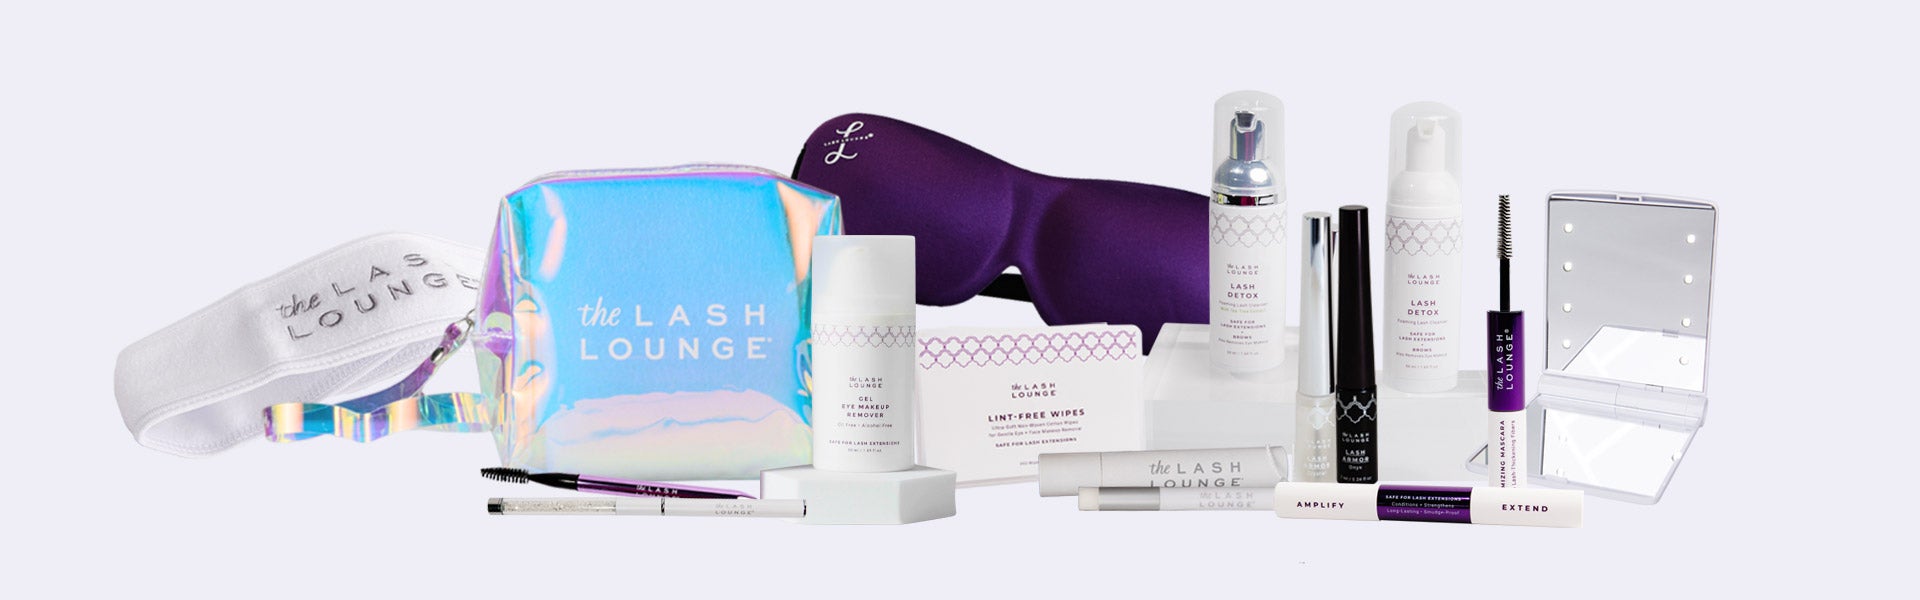 The Lash Lounge's retail product line collectively sitting together.